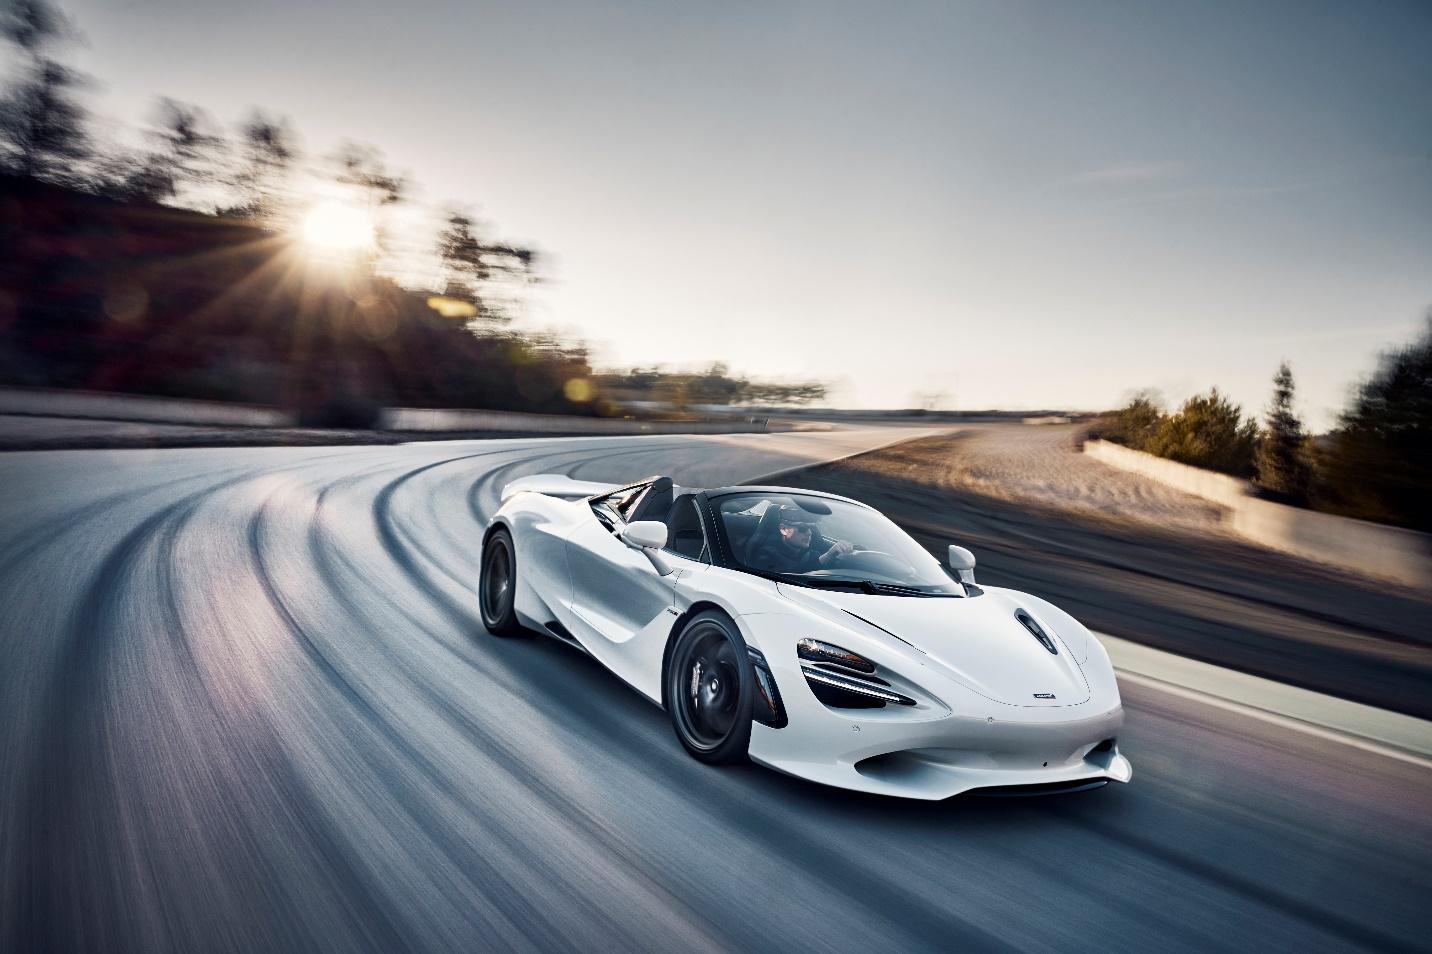 A white sports car on a road

Description automatically generated